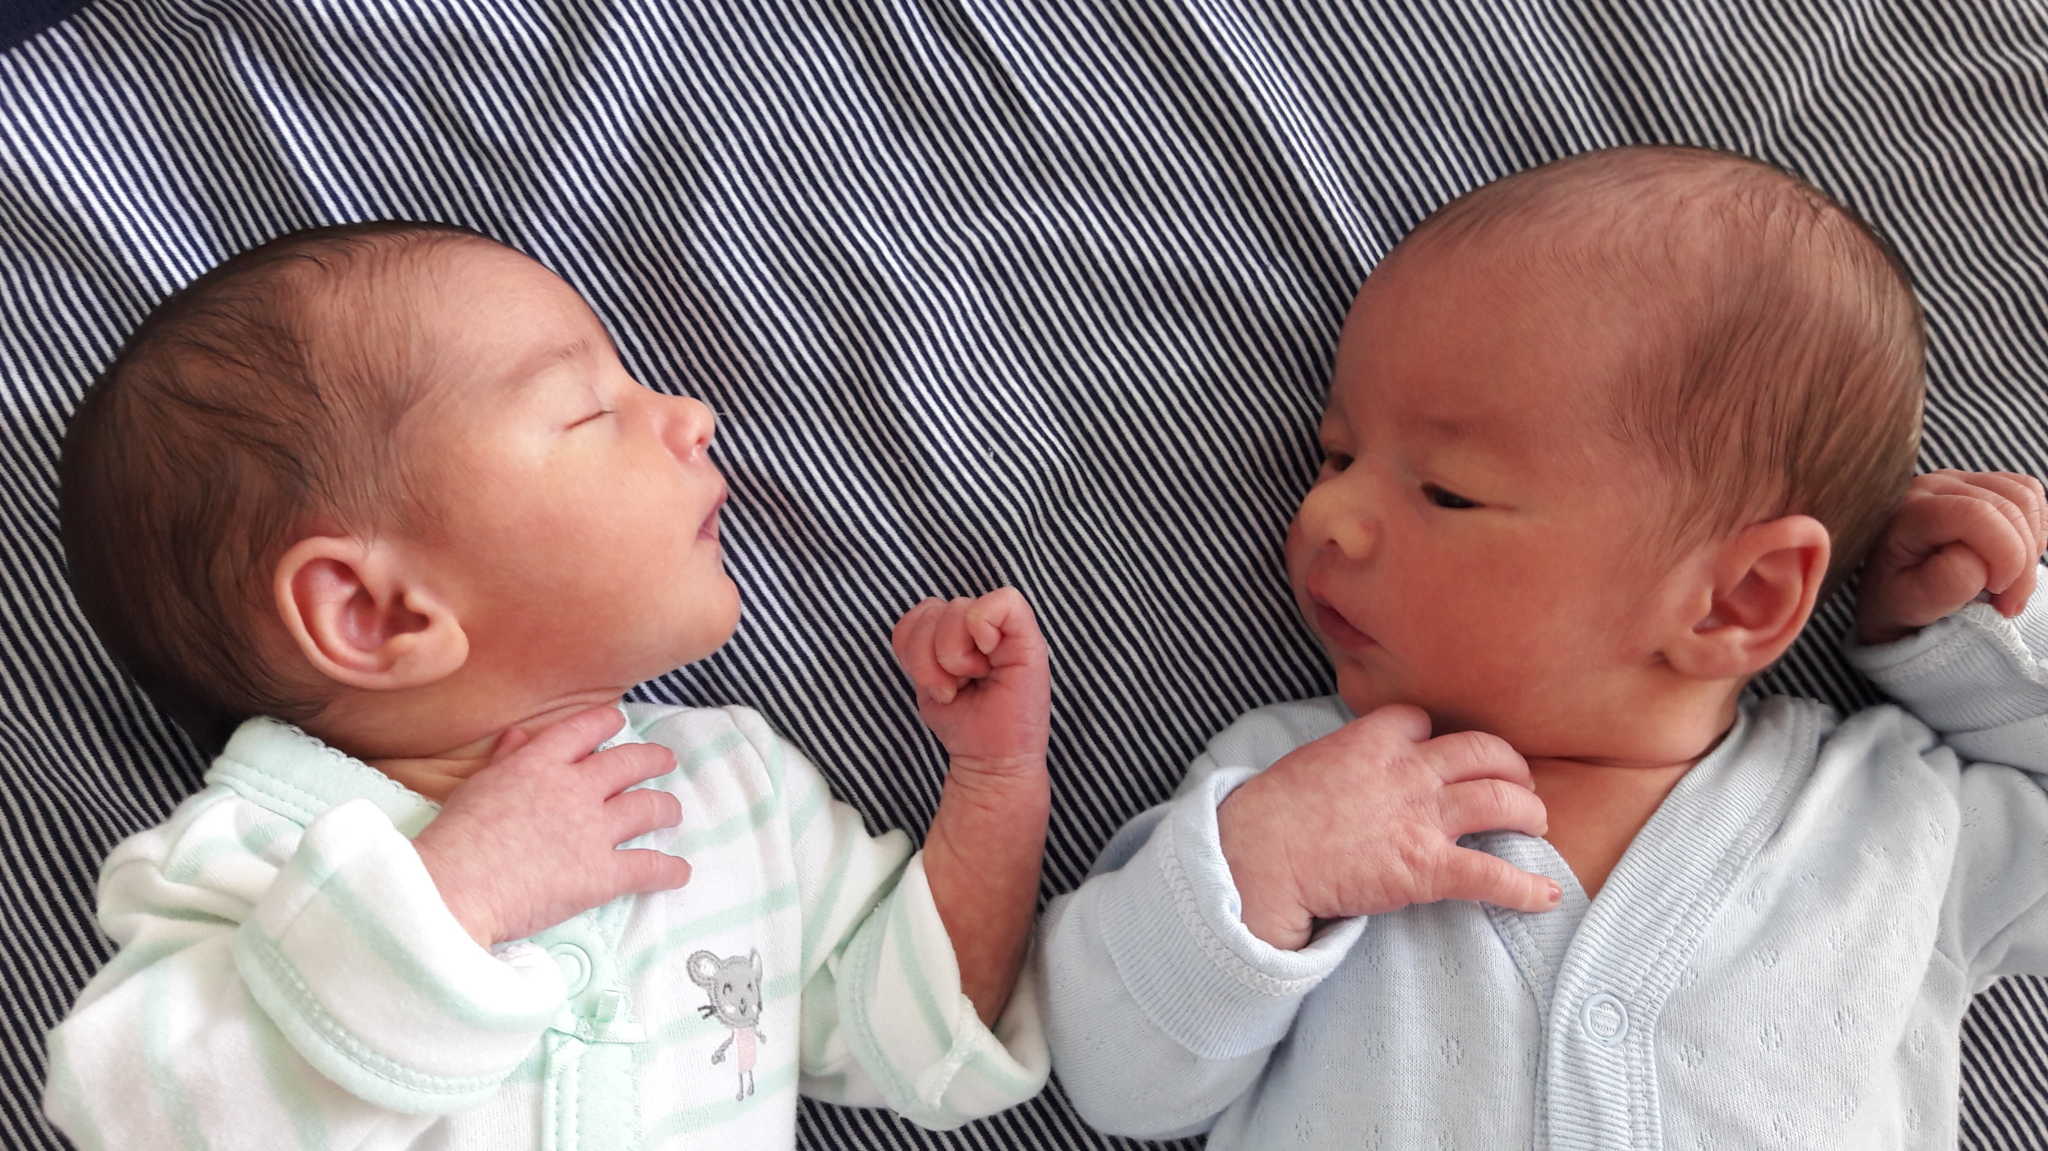 welcome to the fsc family, babies j&c!